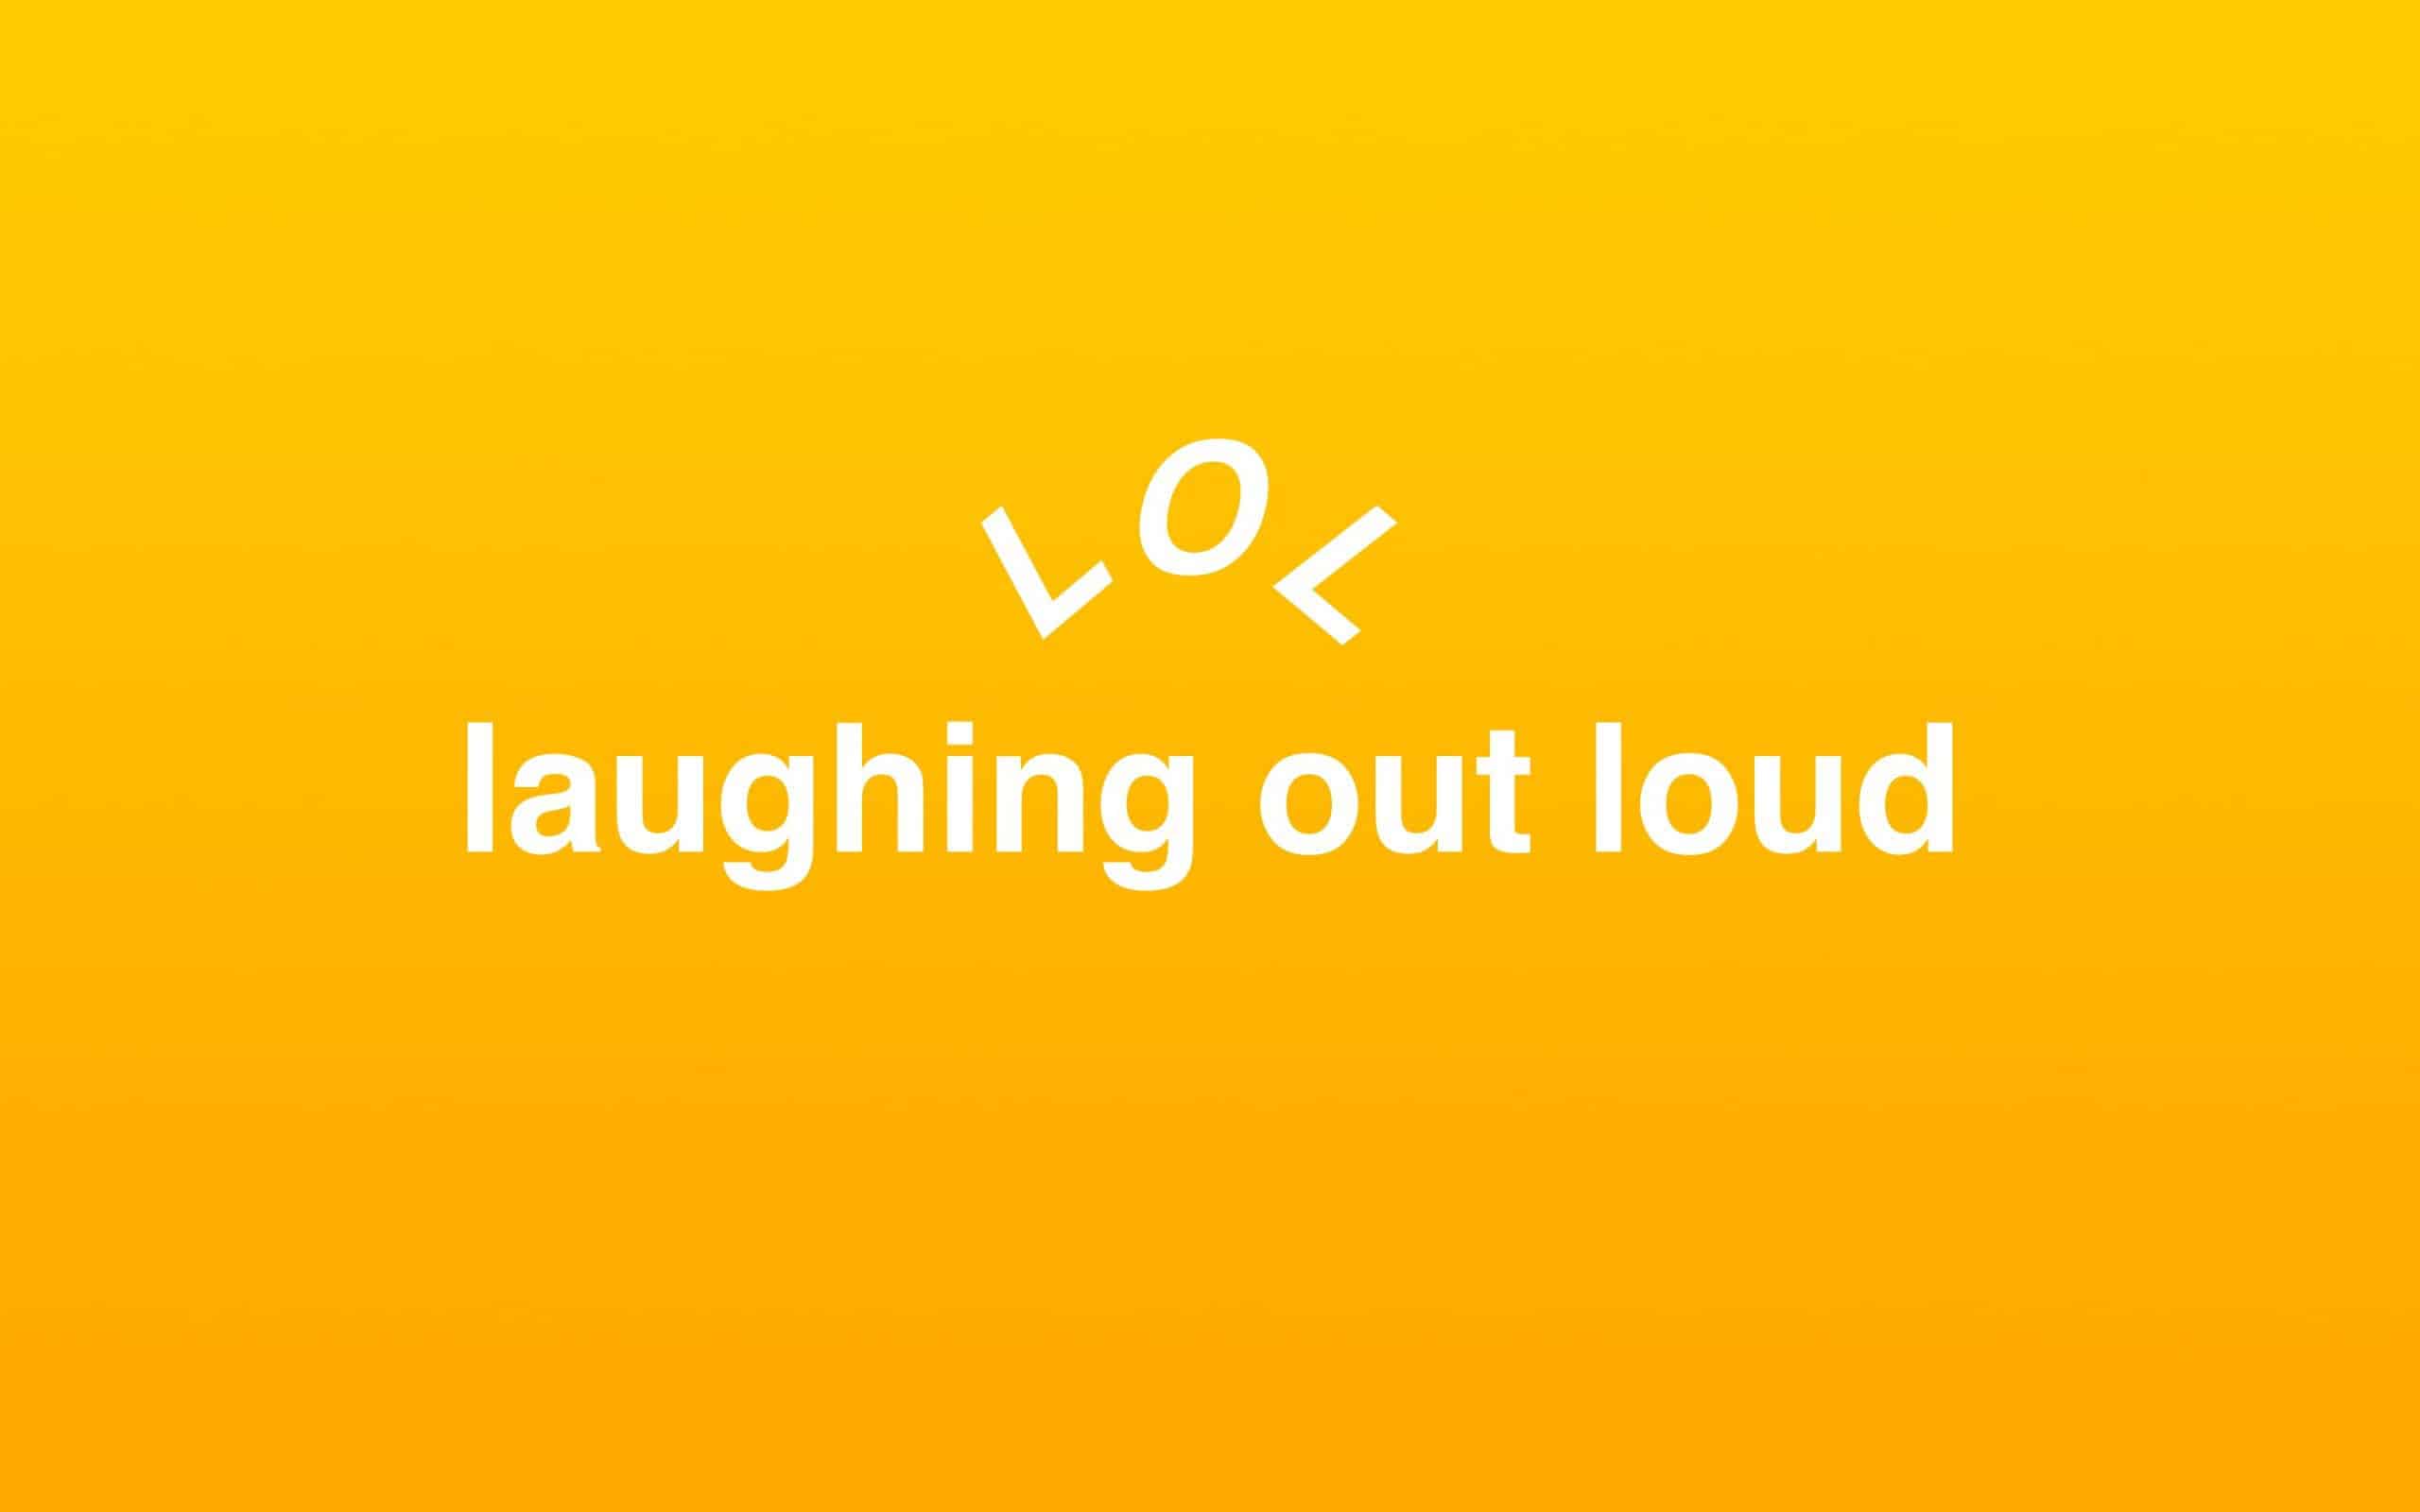 LOLZ » What does LOLZ mean? »